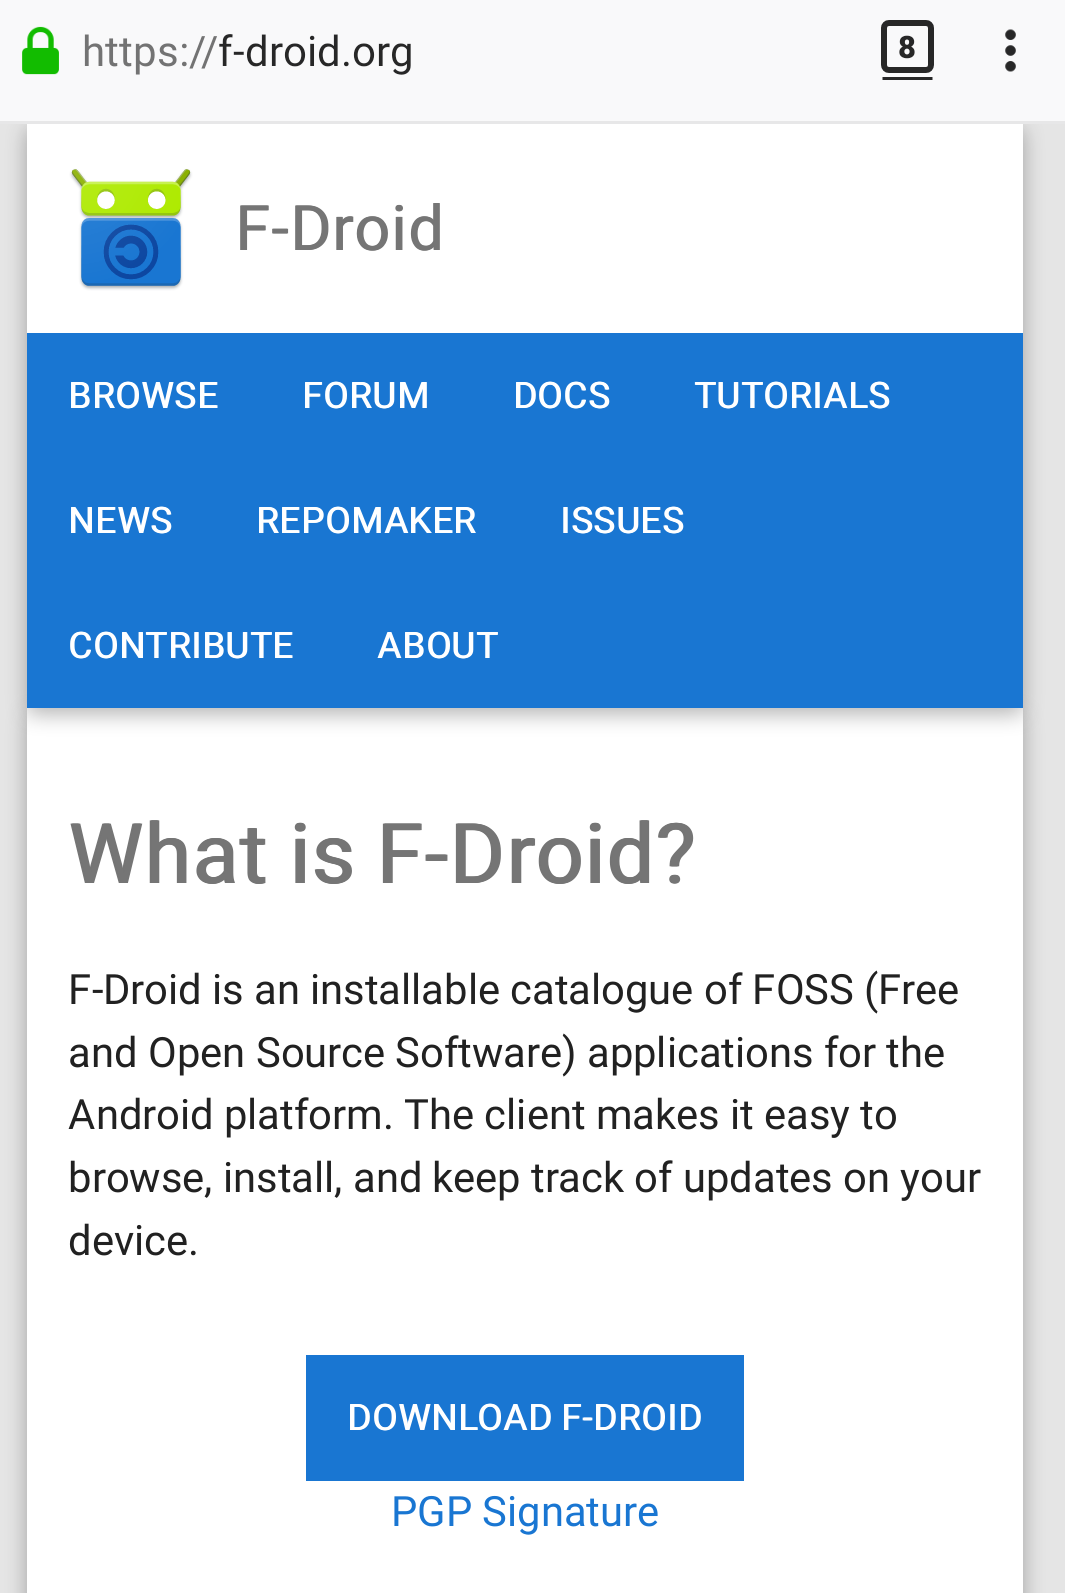 F-Droid-FOSS-Android-1